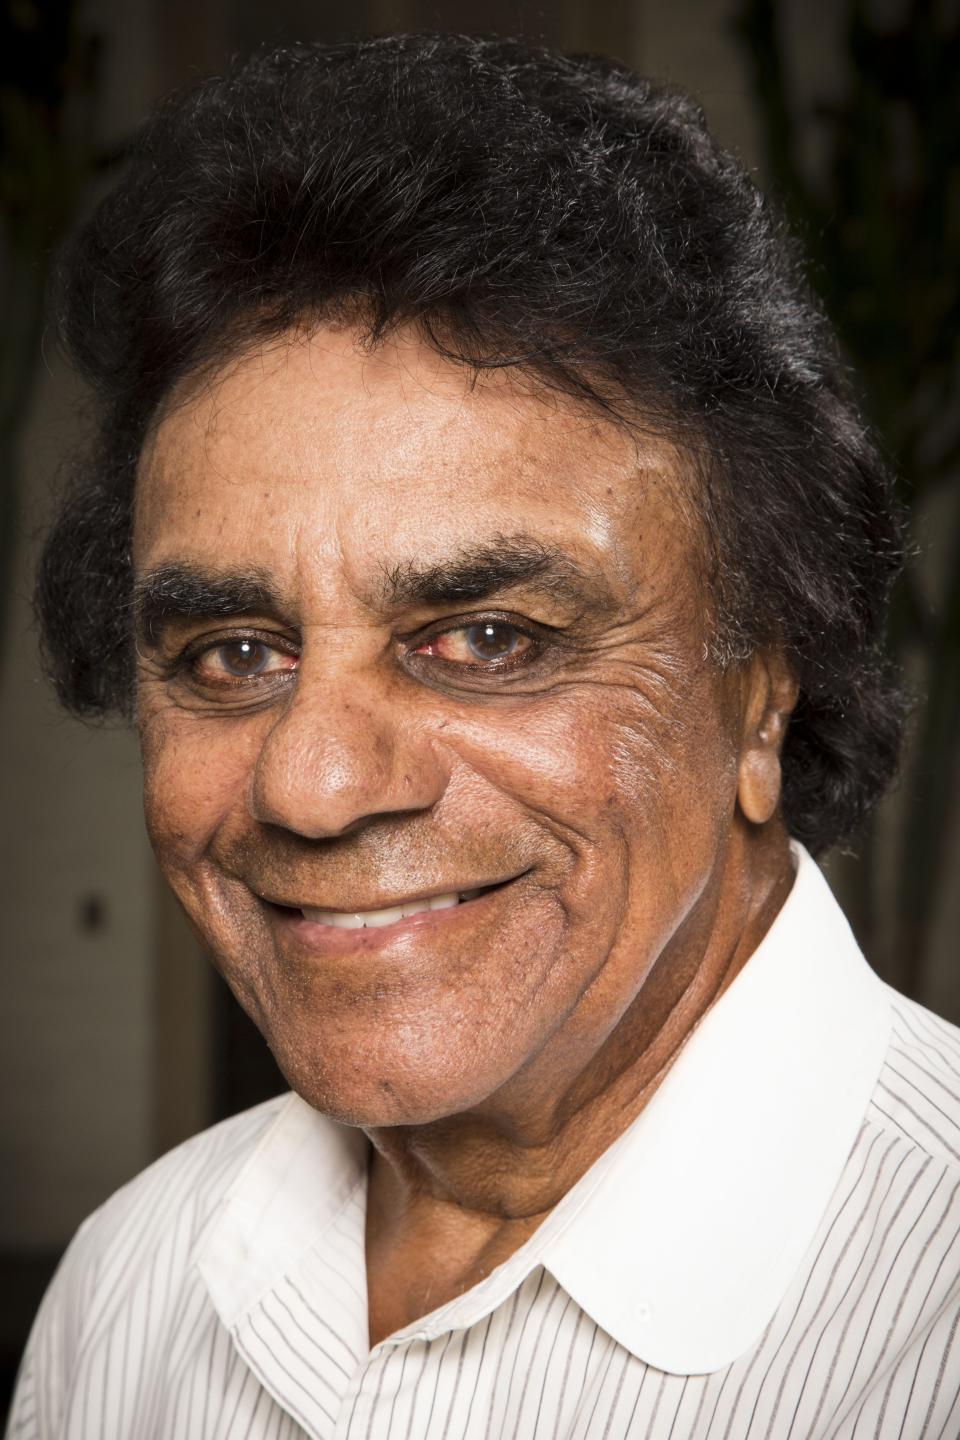 Johnny Mathis will perform at Agua Caliente Resort Casino in Rancho Mirage, Calif., on Feb. 4, 2023.